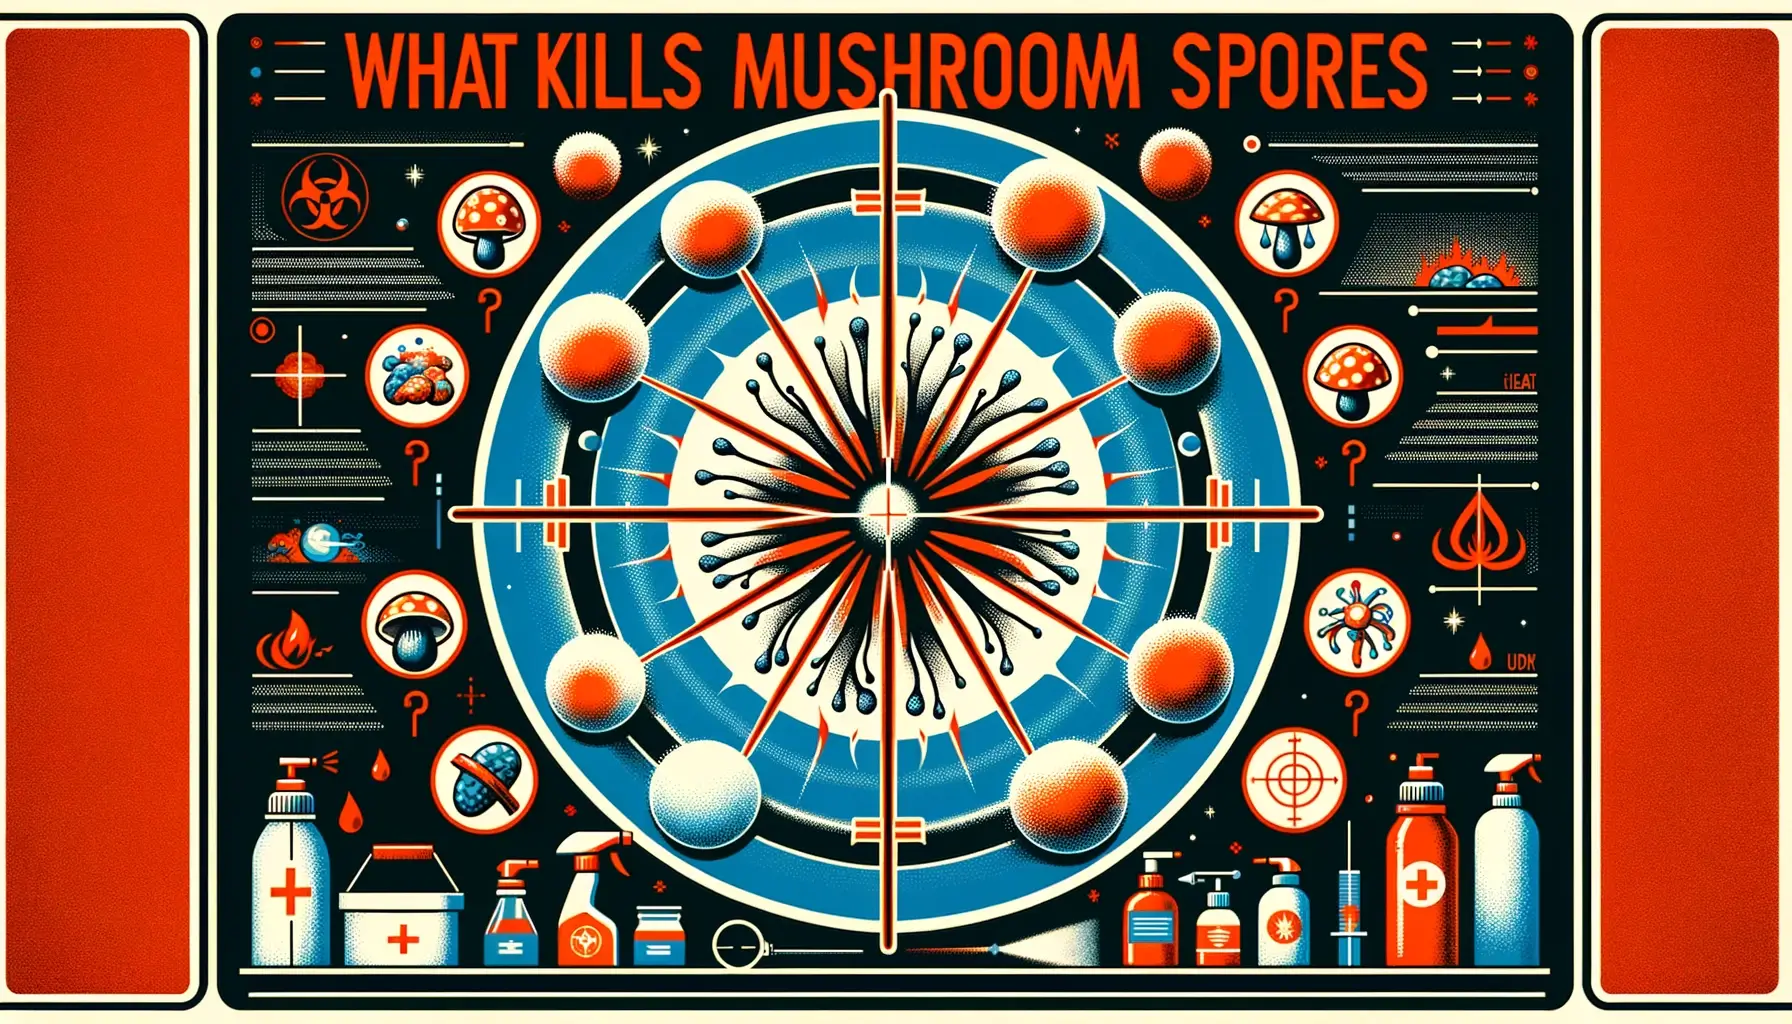 Create an informative and visually engaging featured image for the topic 'what kills mushroom spores'. The image should include a stylized depiction of mushroom spores being eradicated by various sterilization methods such as heat (represented by flames or heat waves), chemical disinfectants (depicted by spray bottles or droplets), and UV light (illustrated with rays of light). The background should symbolize a battle against contamination, with elements like crosshairs or targets on the spores, to convey the idea of targeting and eliminating spores effectively. The design should be suitable for educational content, without any human or animal figures, focusing on the spores and sterilization techniques.